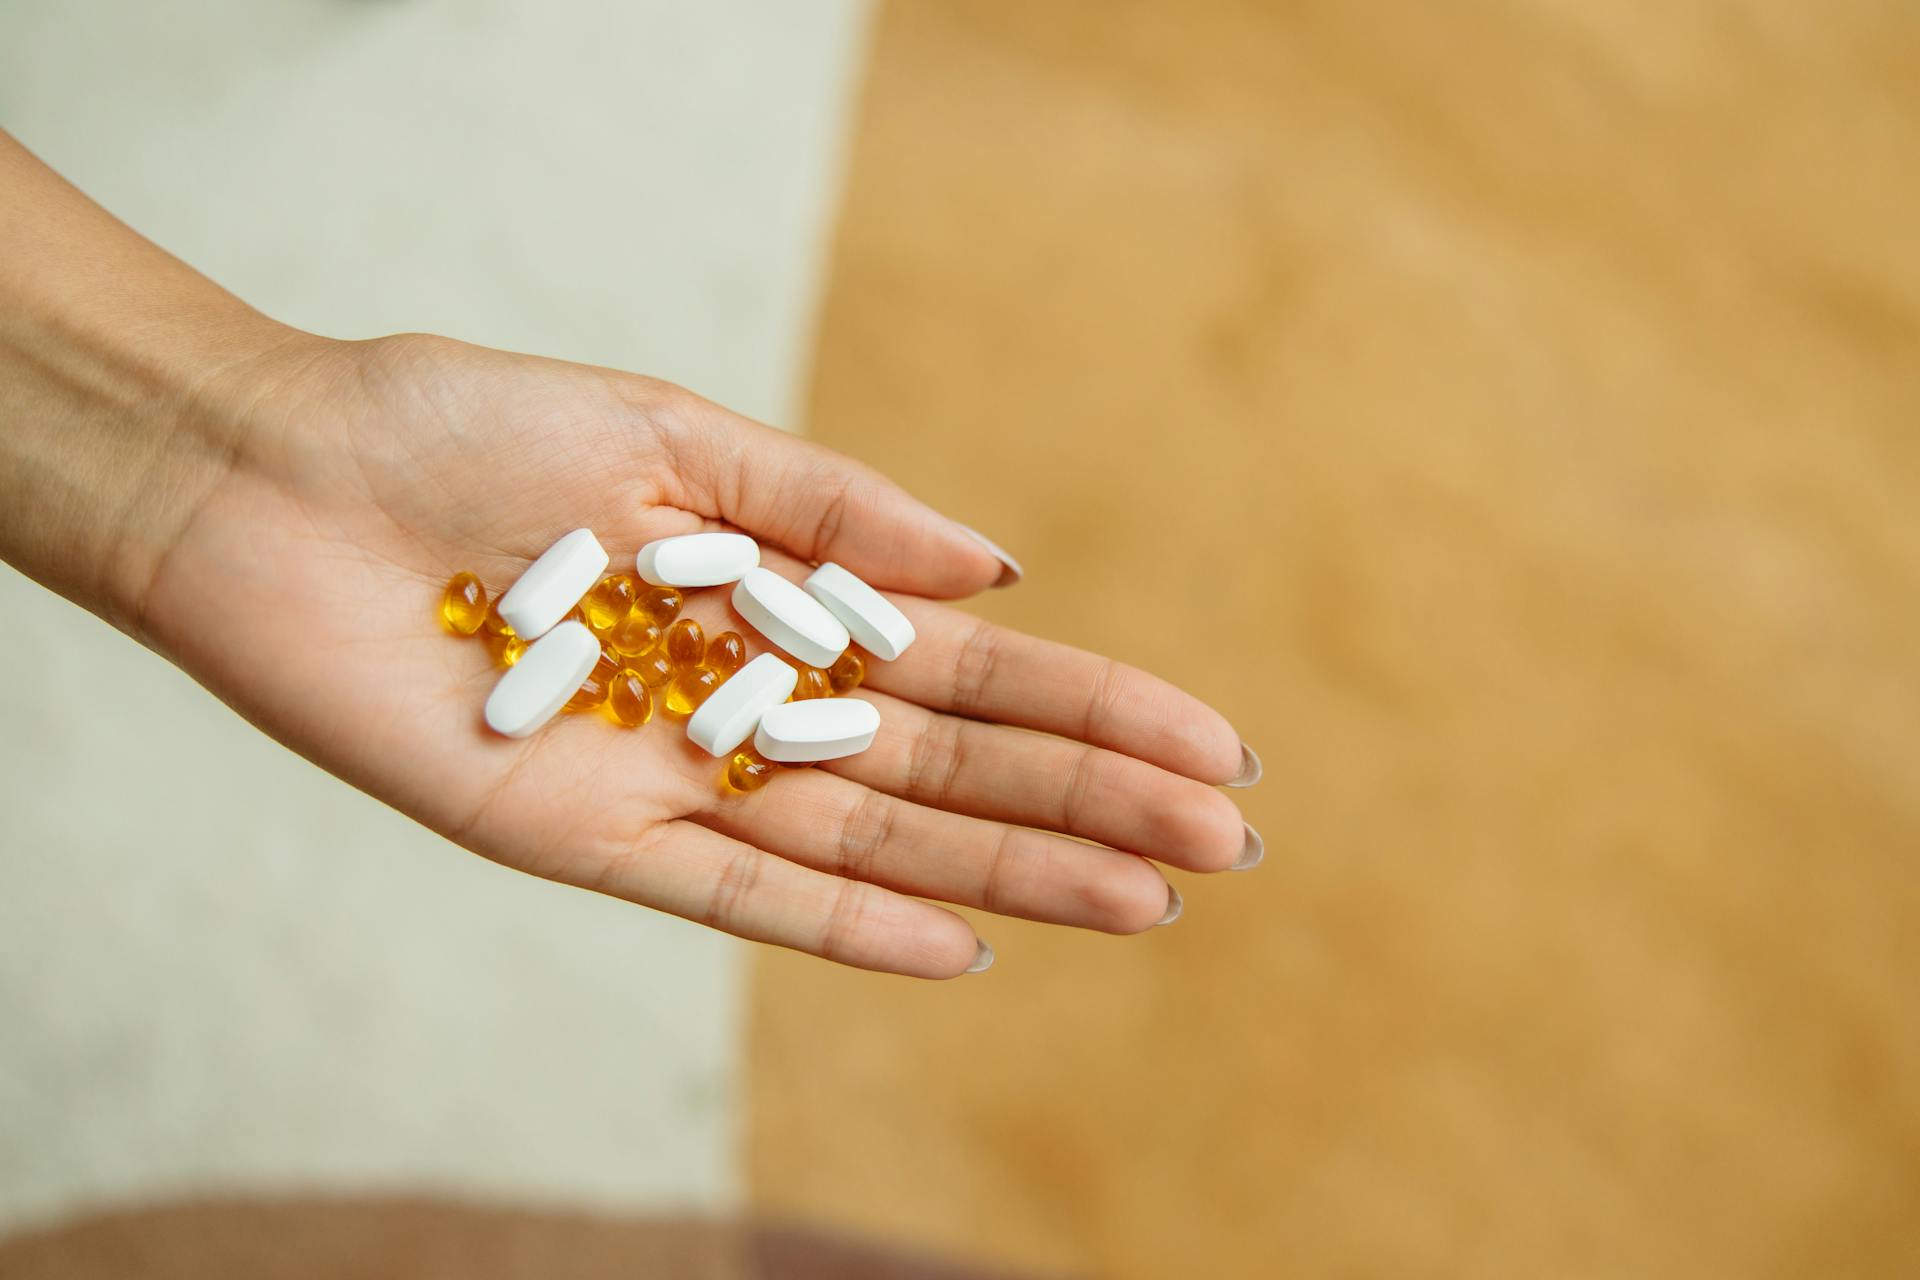 A person holding pills | Source: Pexels